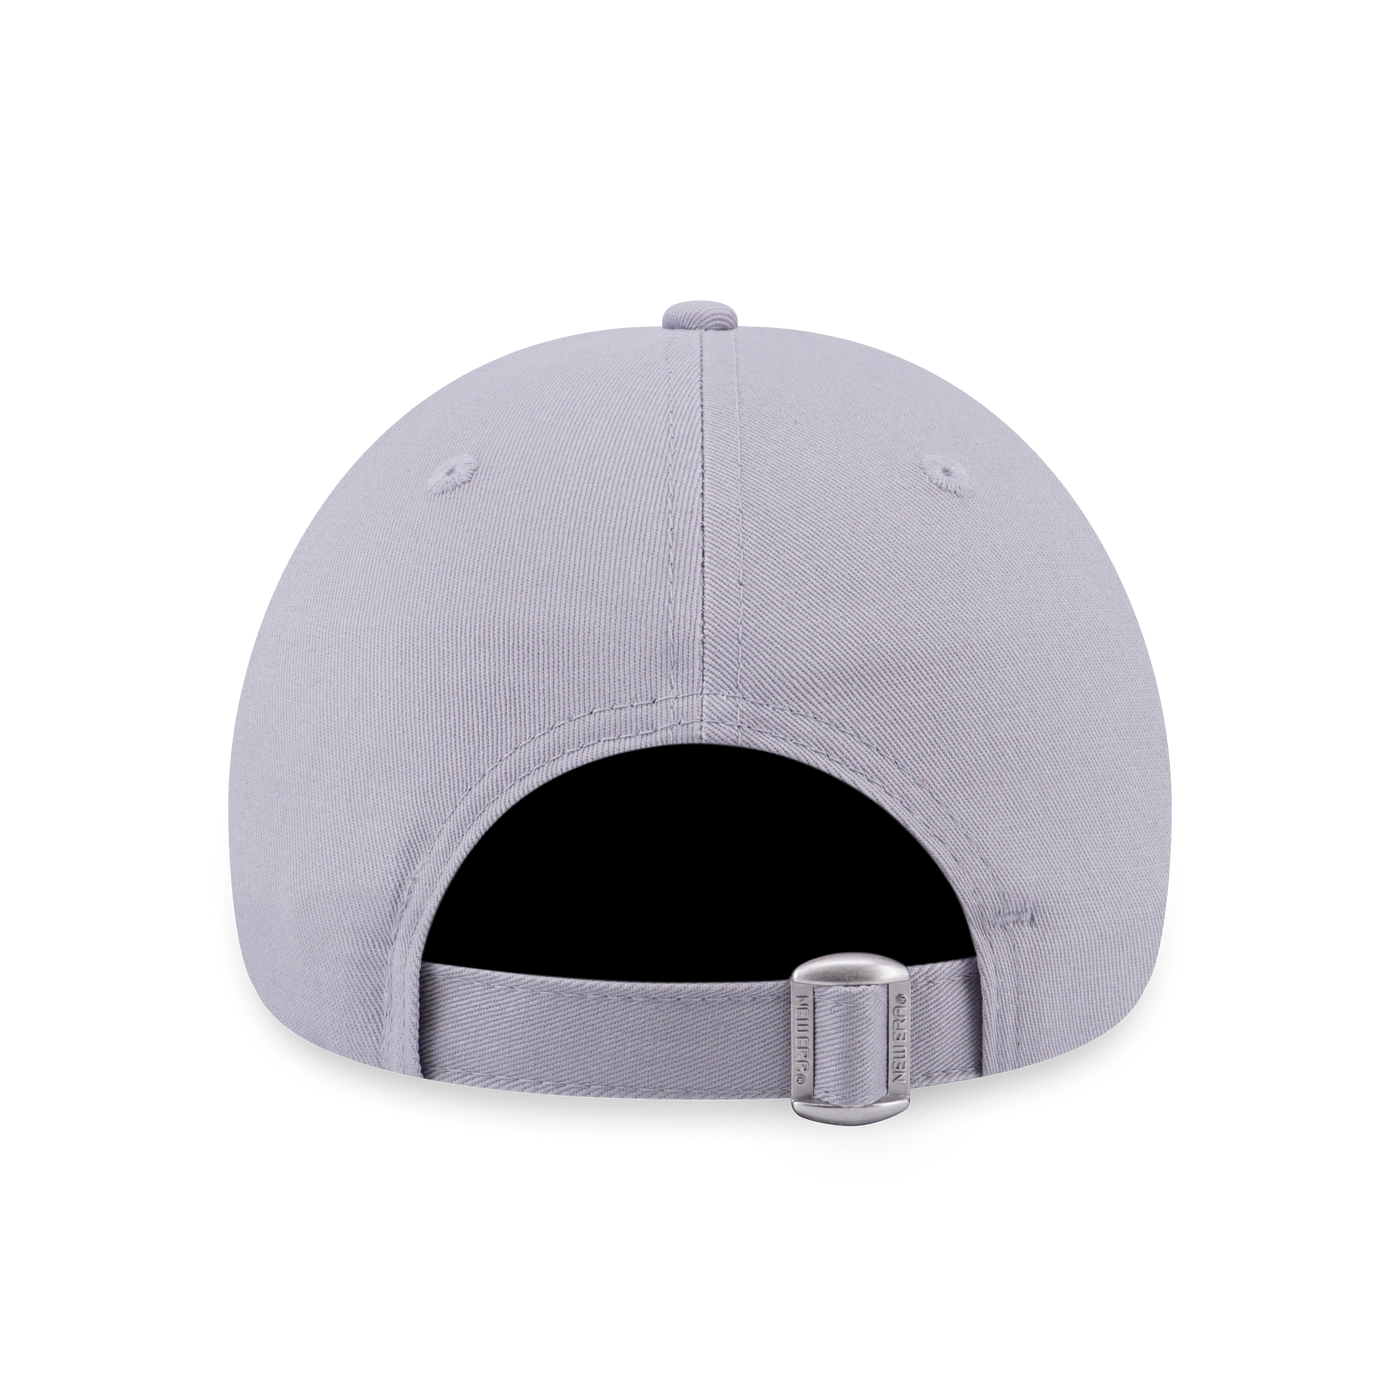 NEW YORK YANKEES CAMO INFILL GRAY 9FORTY CAP